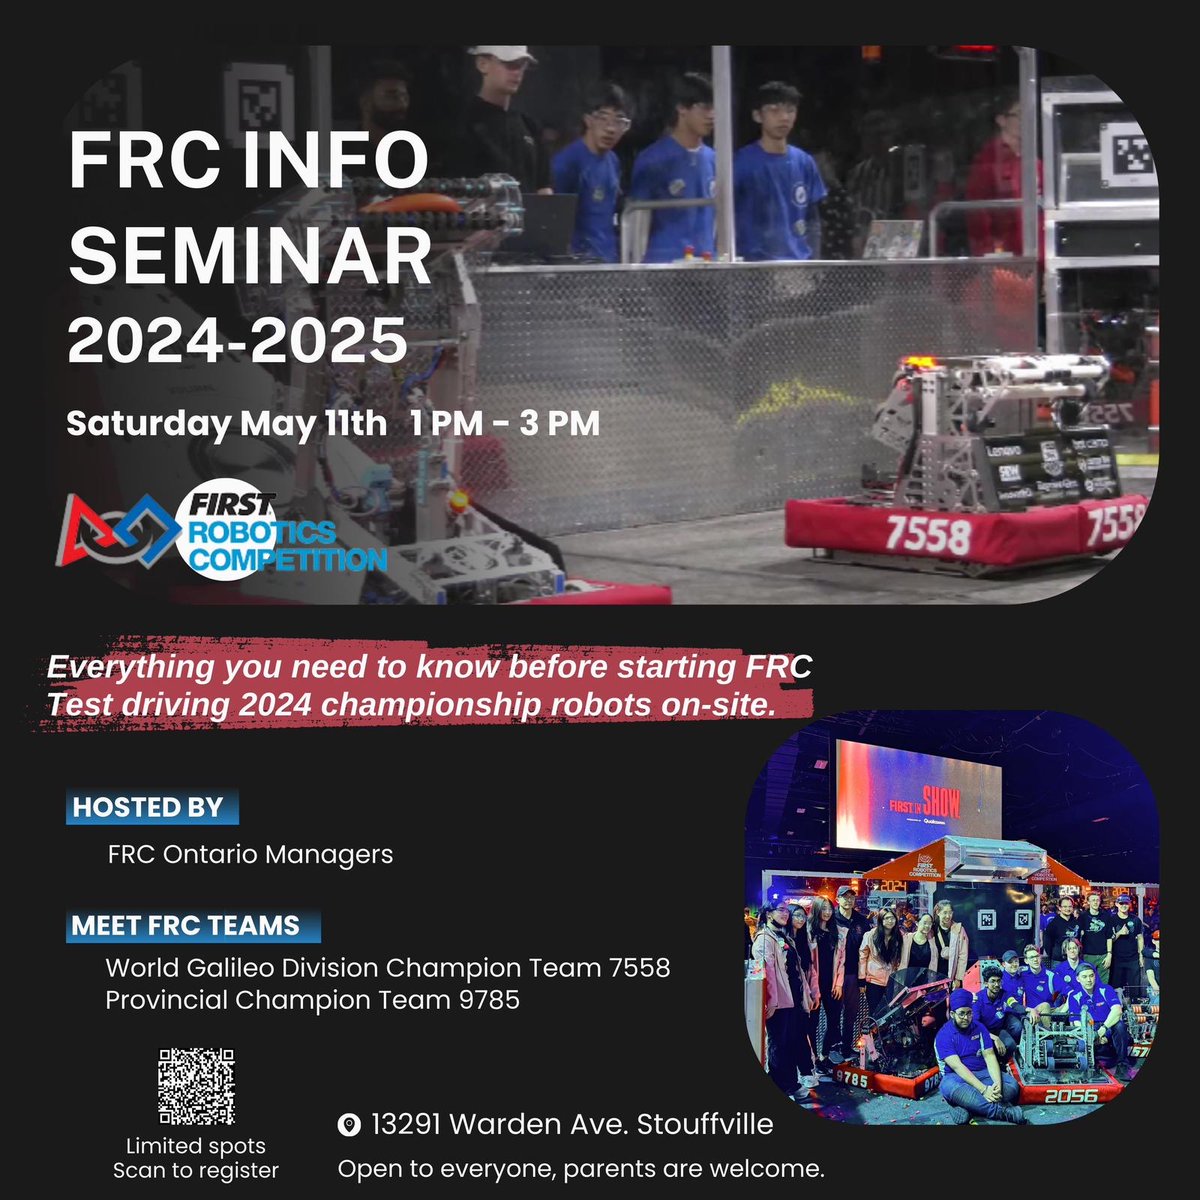 Don't miss the FIRST Robotics Competition Seminar on Saturday, May 11th, from 1 p.m. to 3 p.m. There are limited spots, so scan the QR Code to register soon!